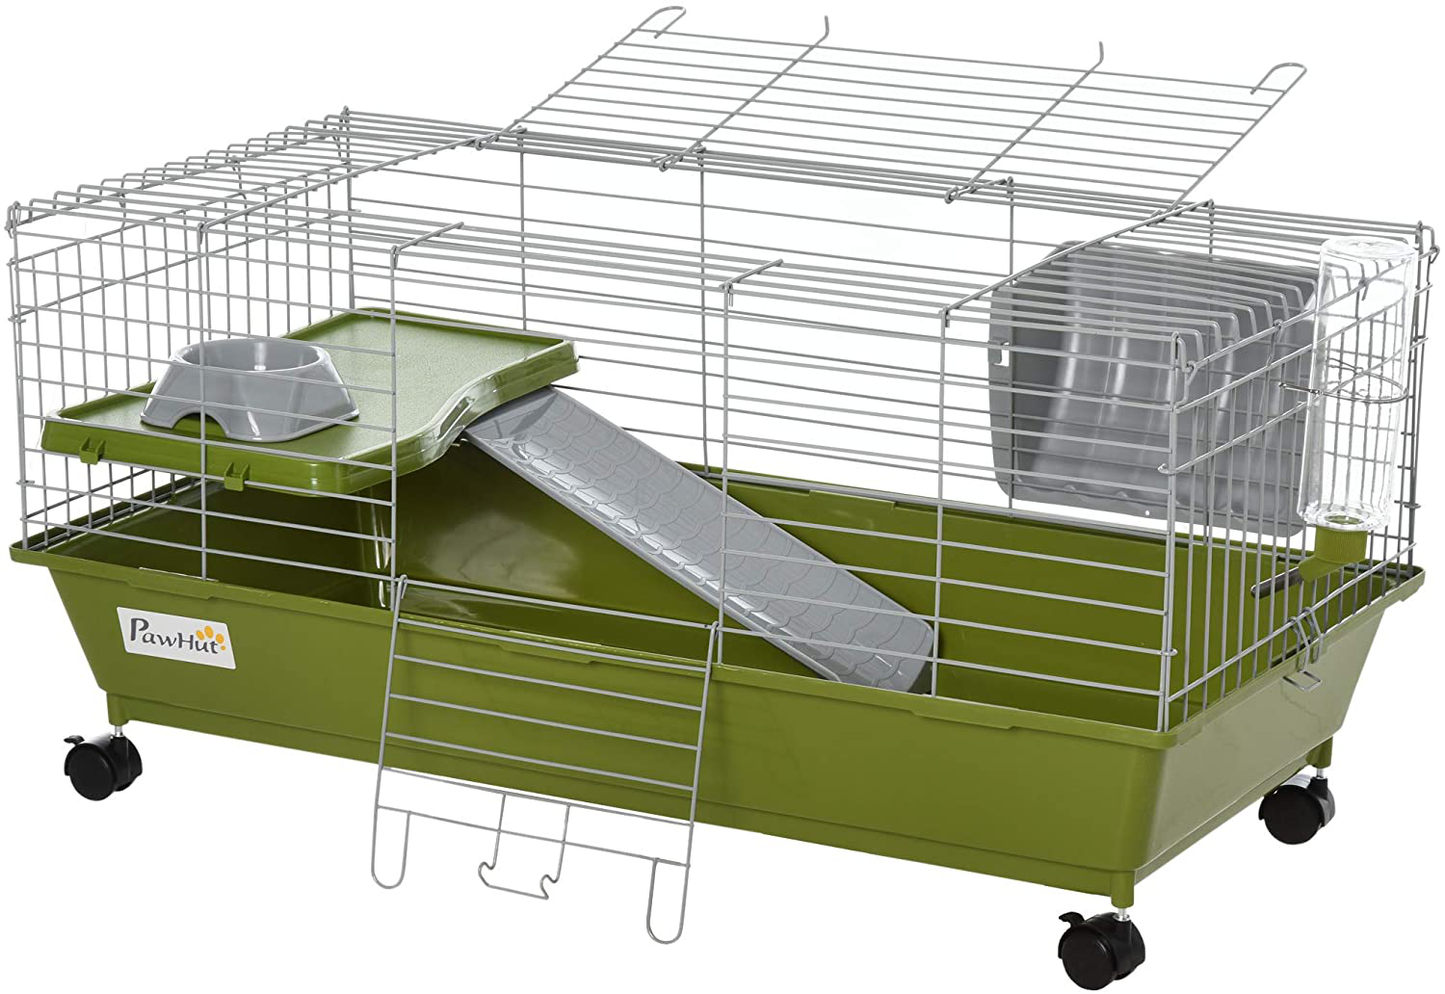 Pawhut Small Animal Cage Rabbit Chinchilla Guinea Pig Hutch Pet Play House with Platform, Ramp, Food Dish, Water Bottle, Hay Feeder